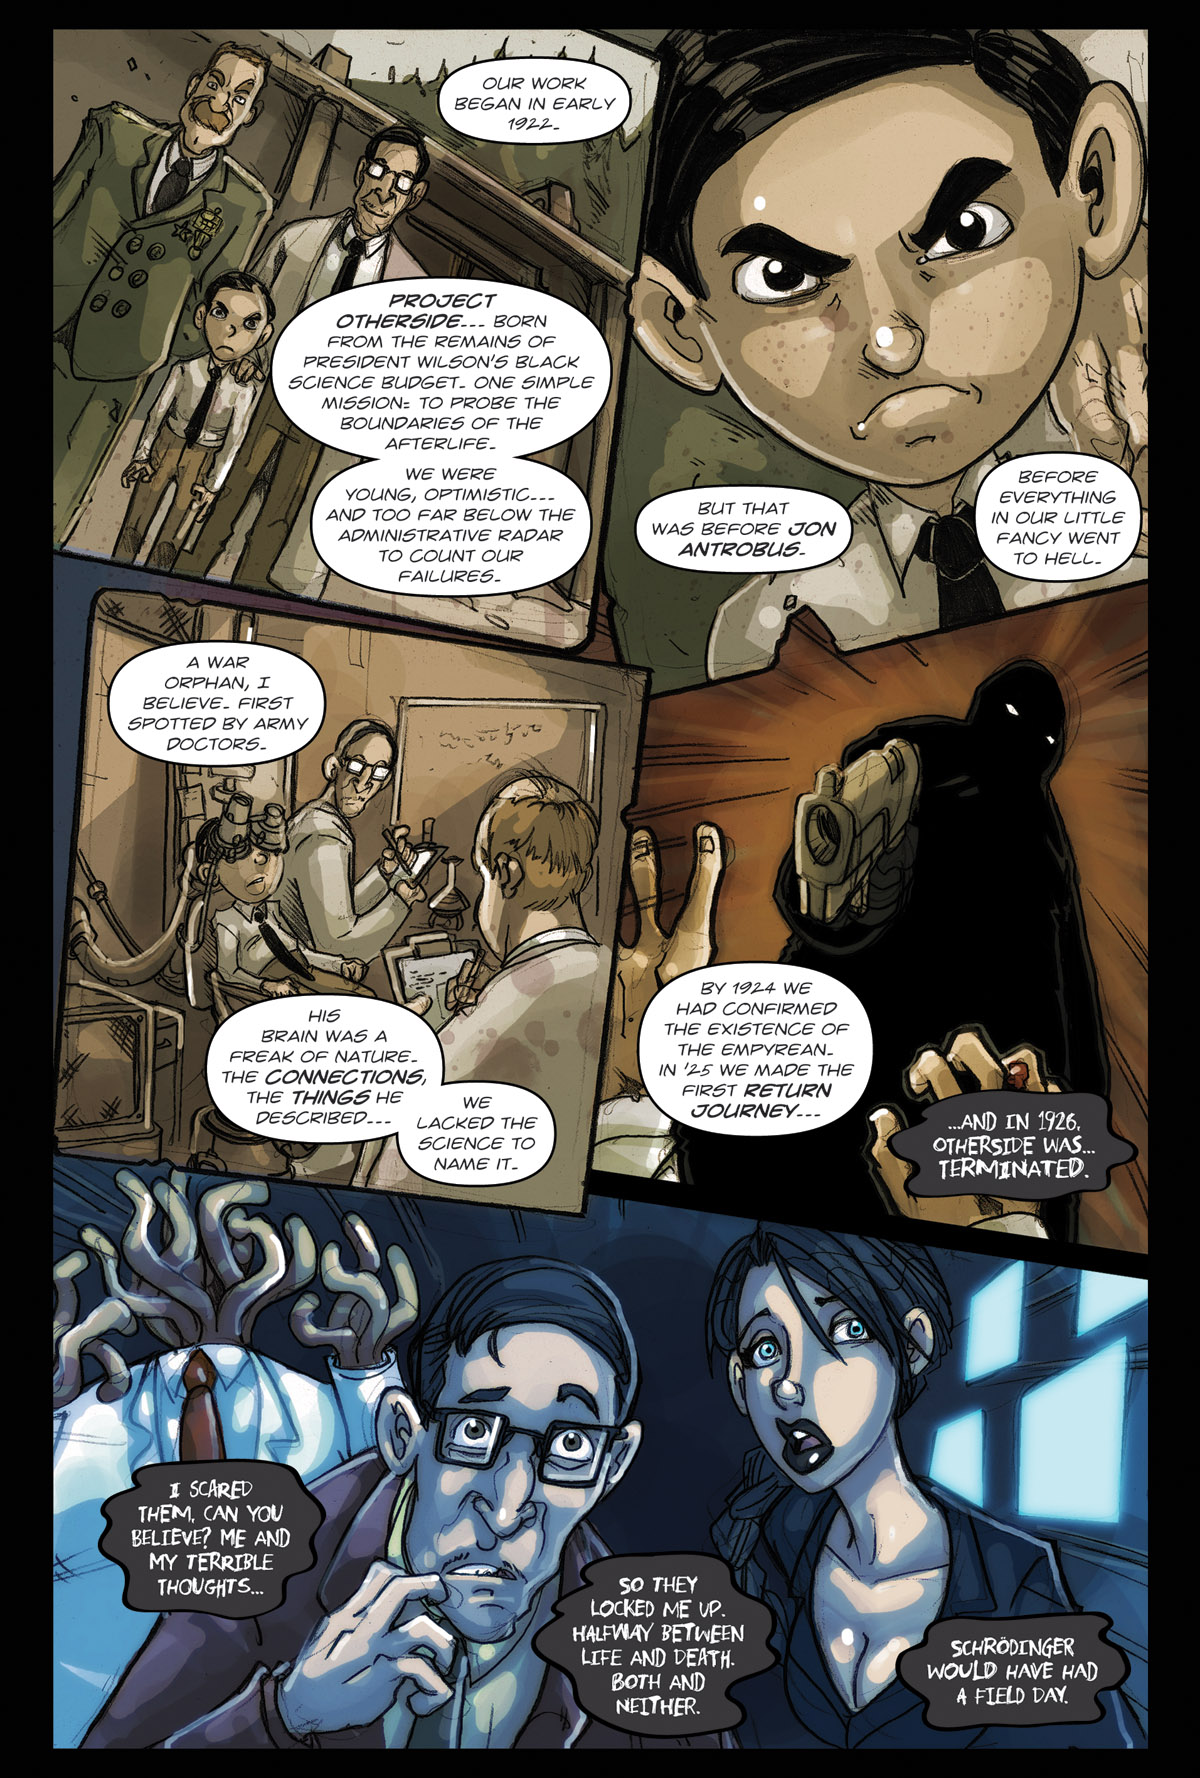 Afterlife Inc. | Near Life | Page 21